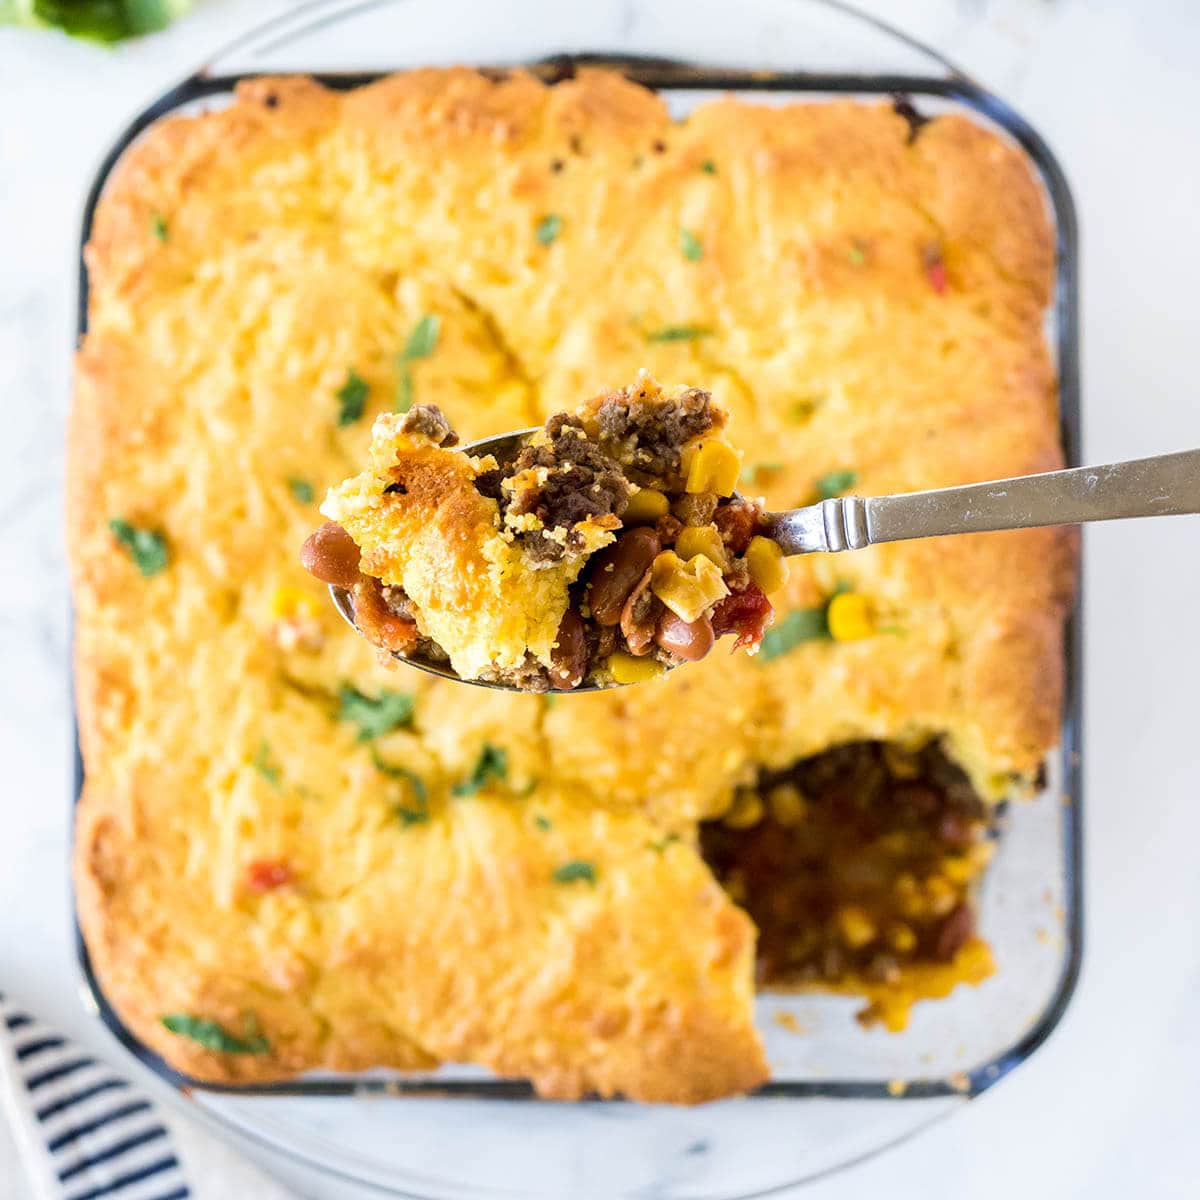 Cowboy Cornbread casserole in baking dish with serving spoon.